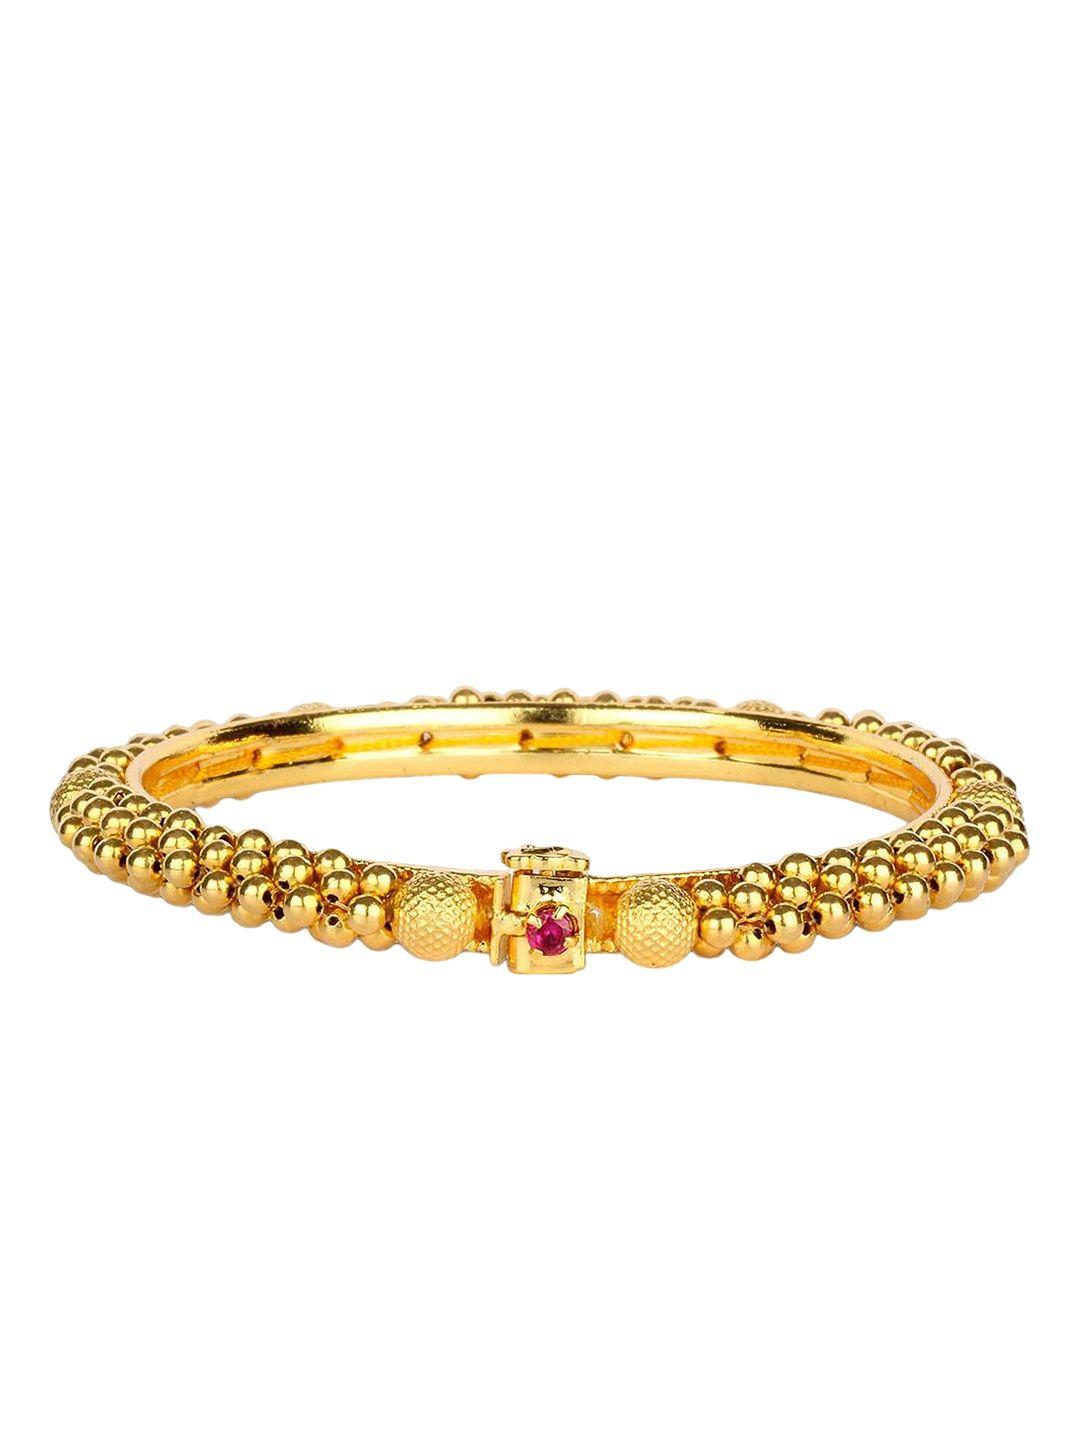 candere a kalyan jewellers company 22kt (916) gold traditional tushi bangle- 2.25gm